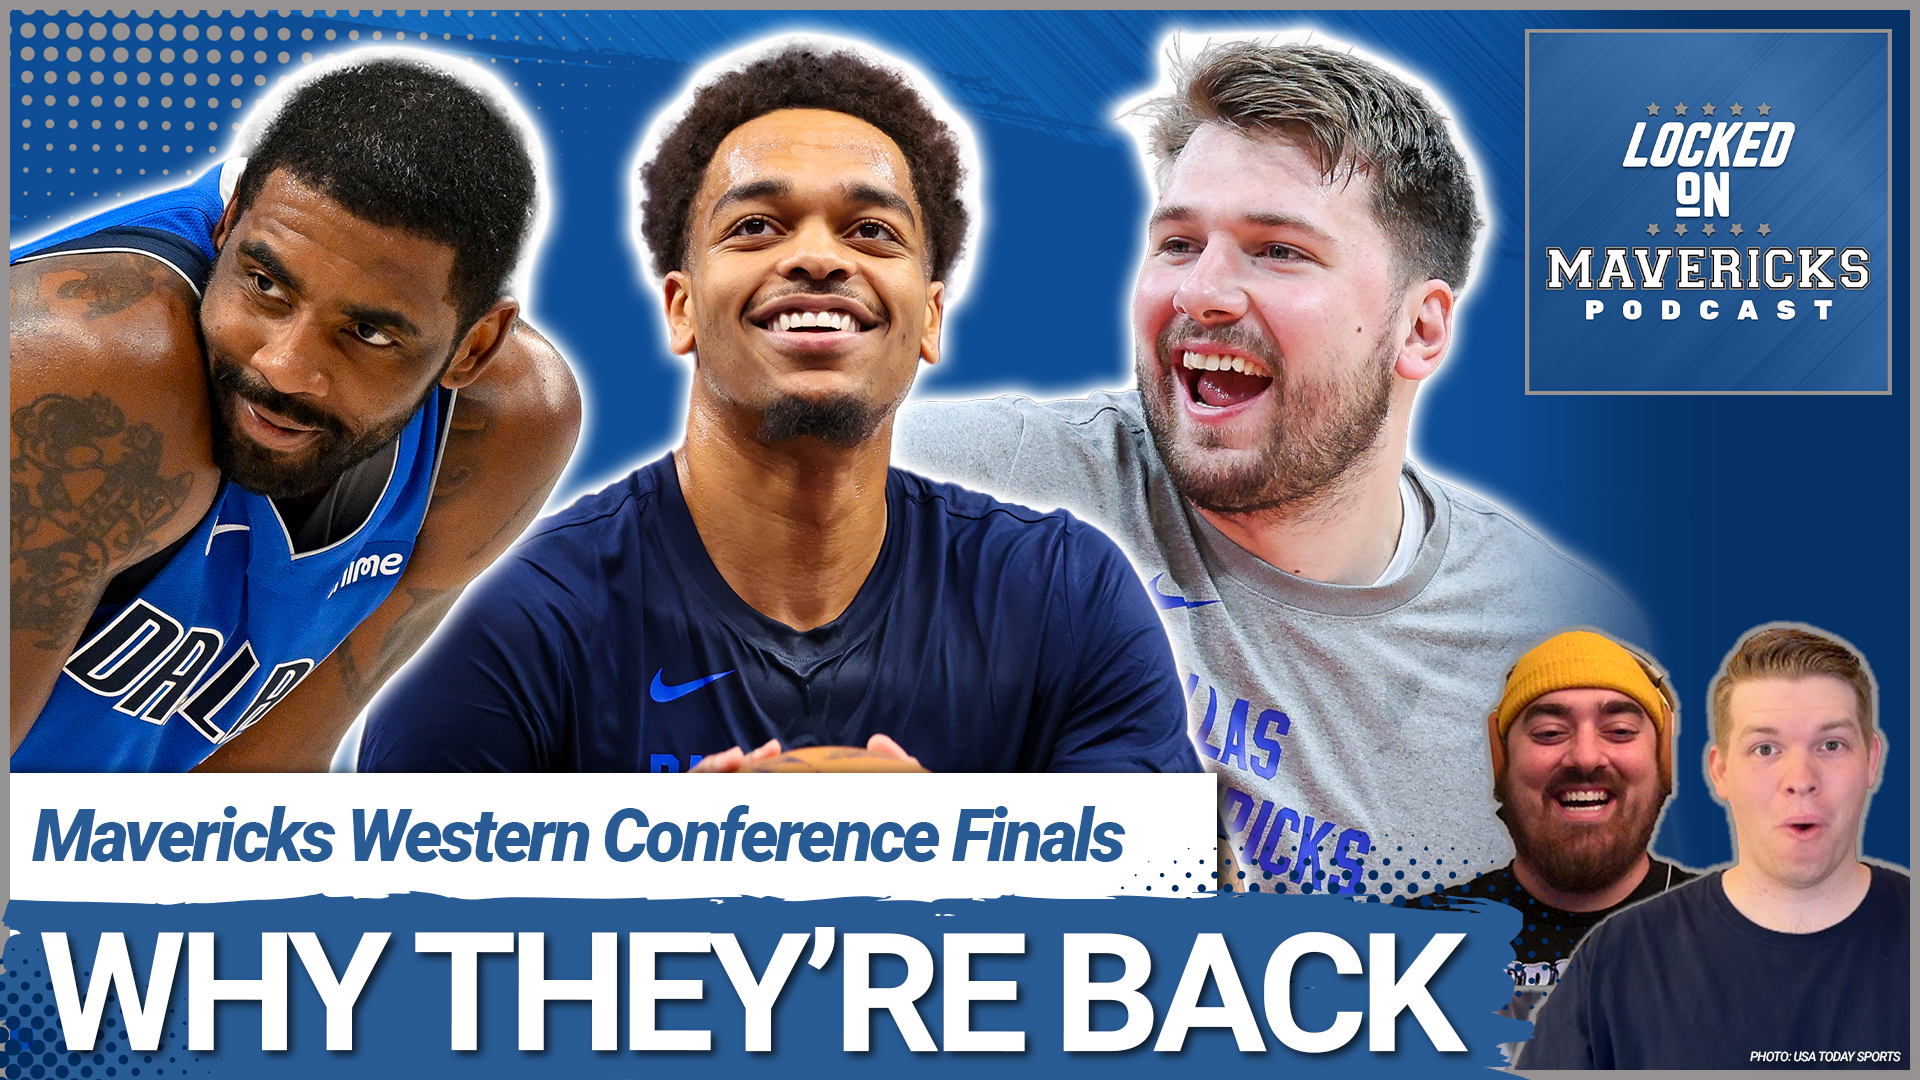 Nick Angstadt & Isaac Harris discuss why the Dallas Mavericks are back in the West Finals behind Luka Doncic, Kyrie Irving, and PJ Washington.